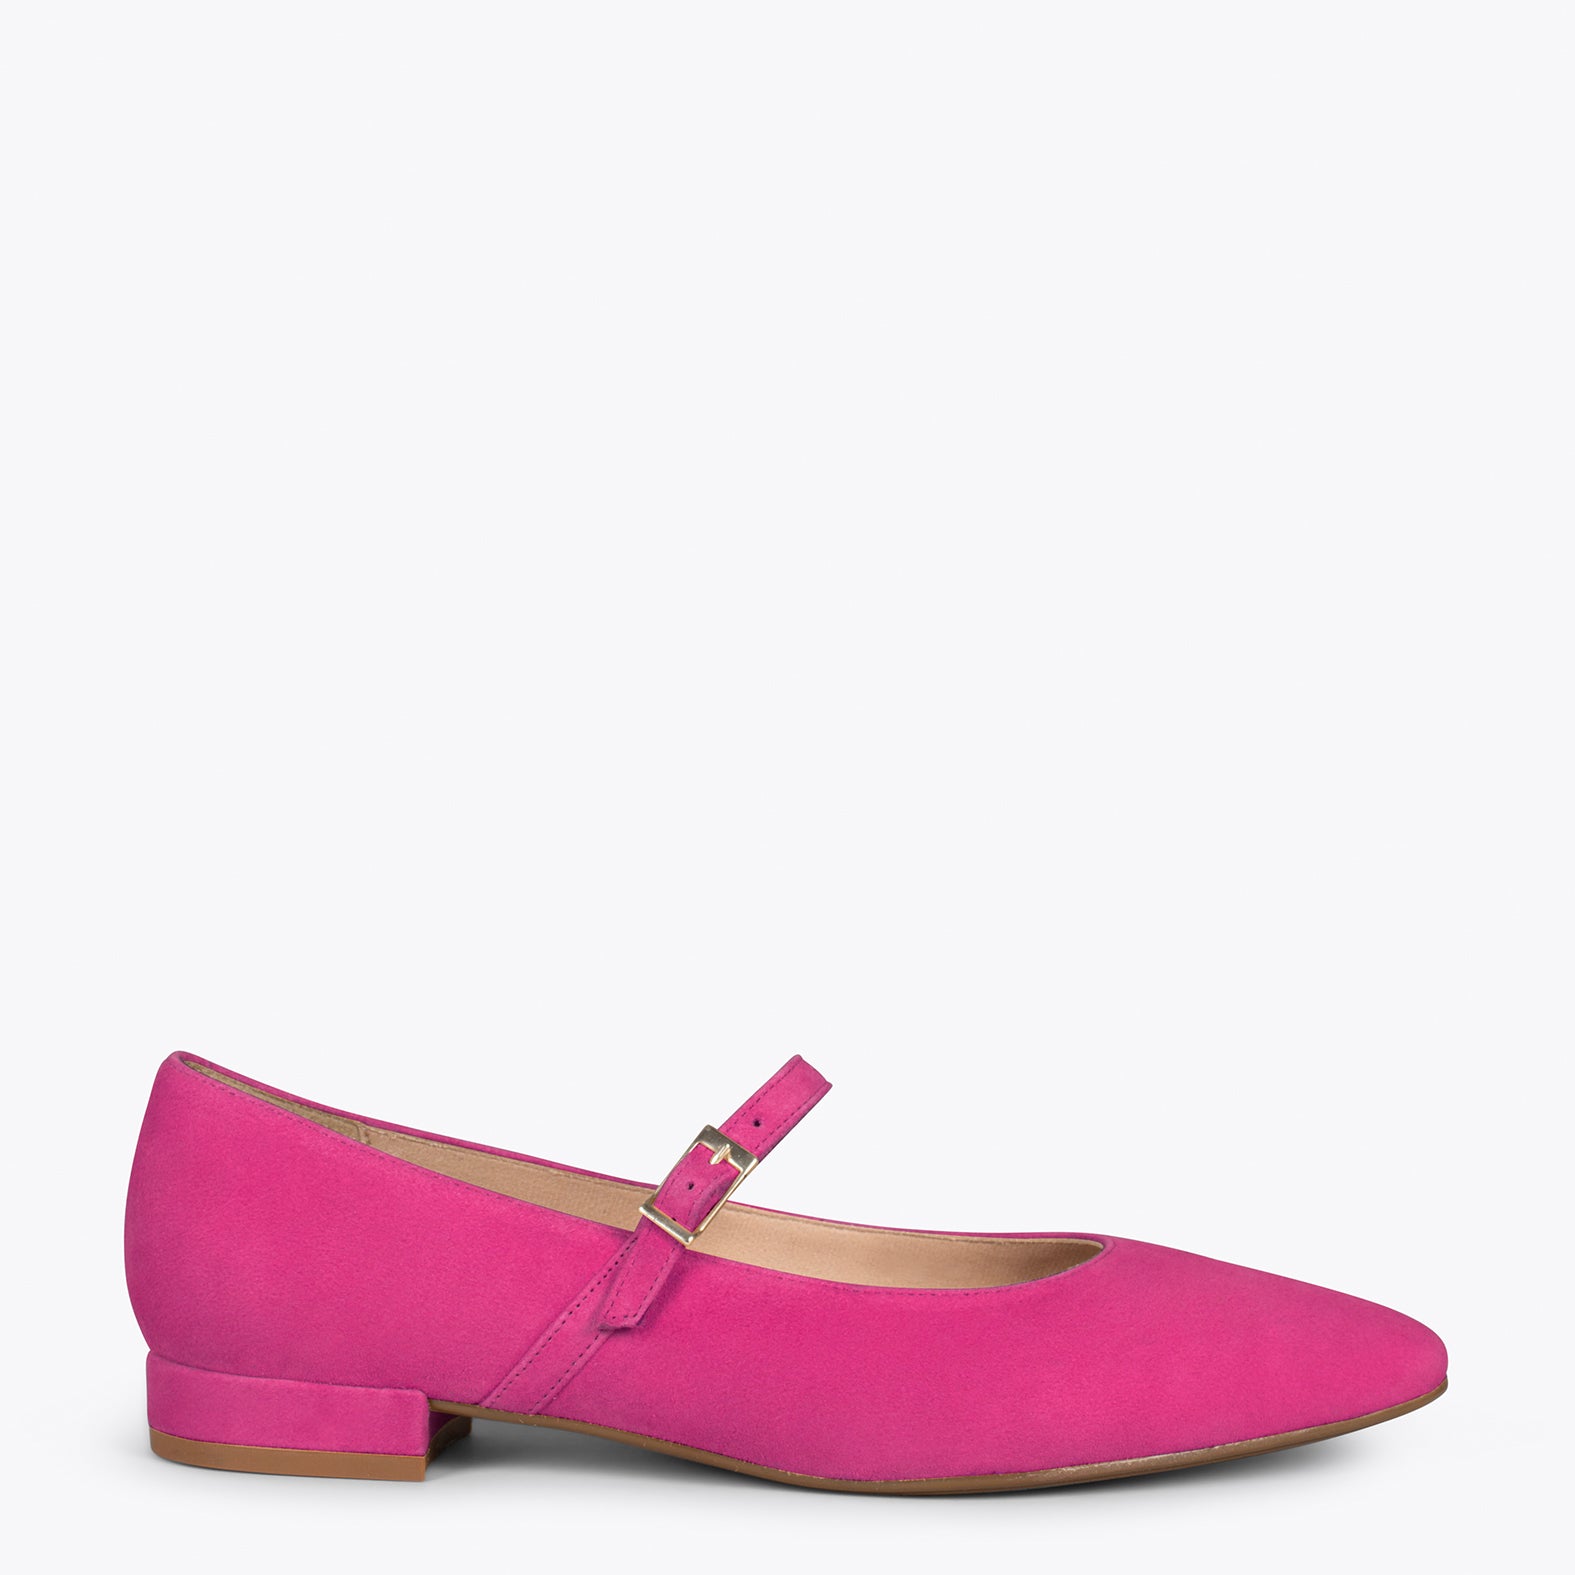 MARY-JANE – HOT PINK buckled leather flats